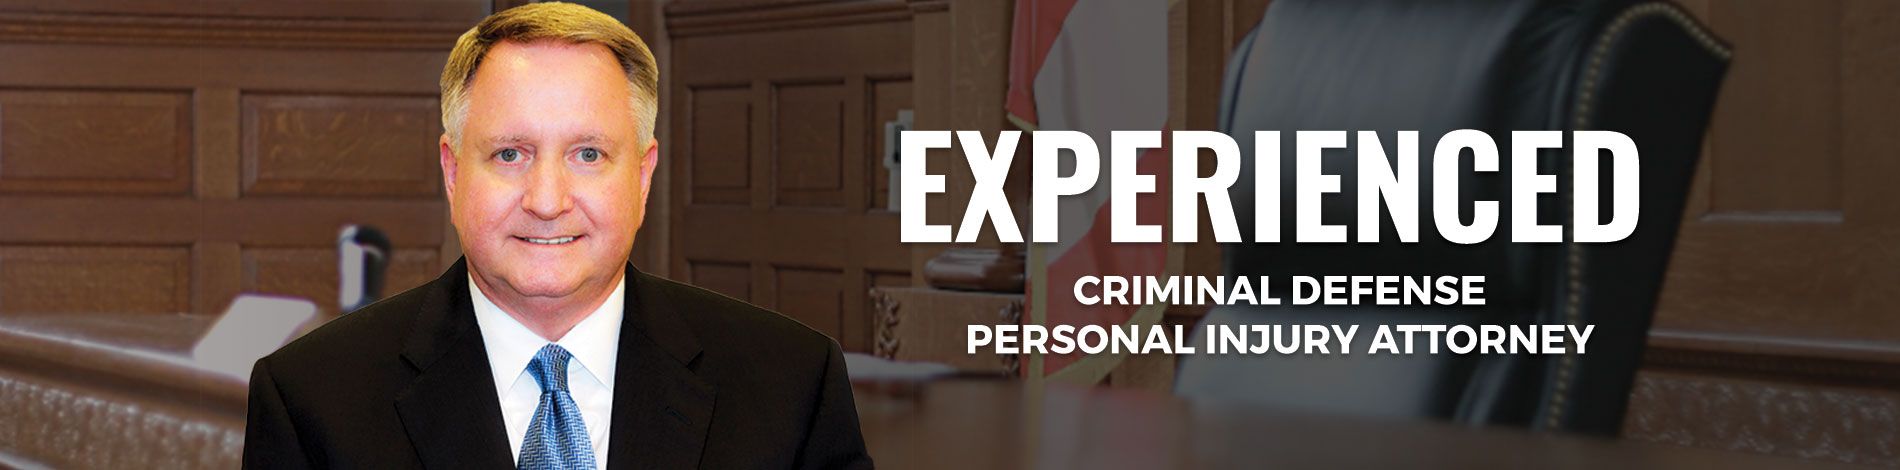 Experienced - Criminal Defense Personal Injury Attorney